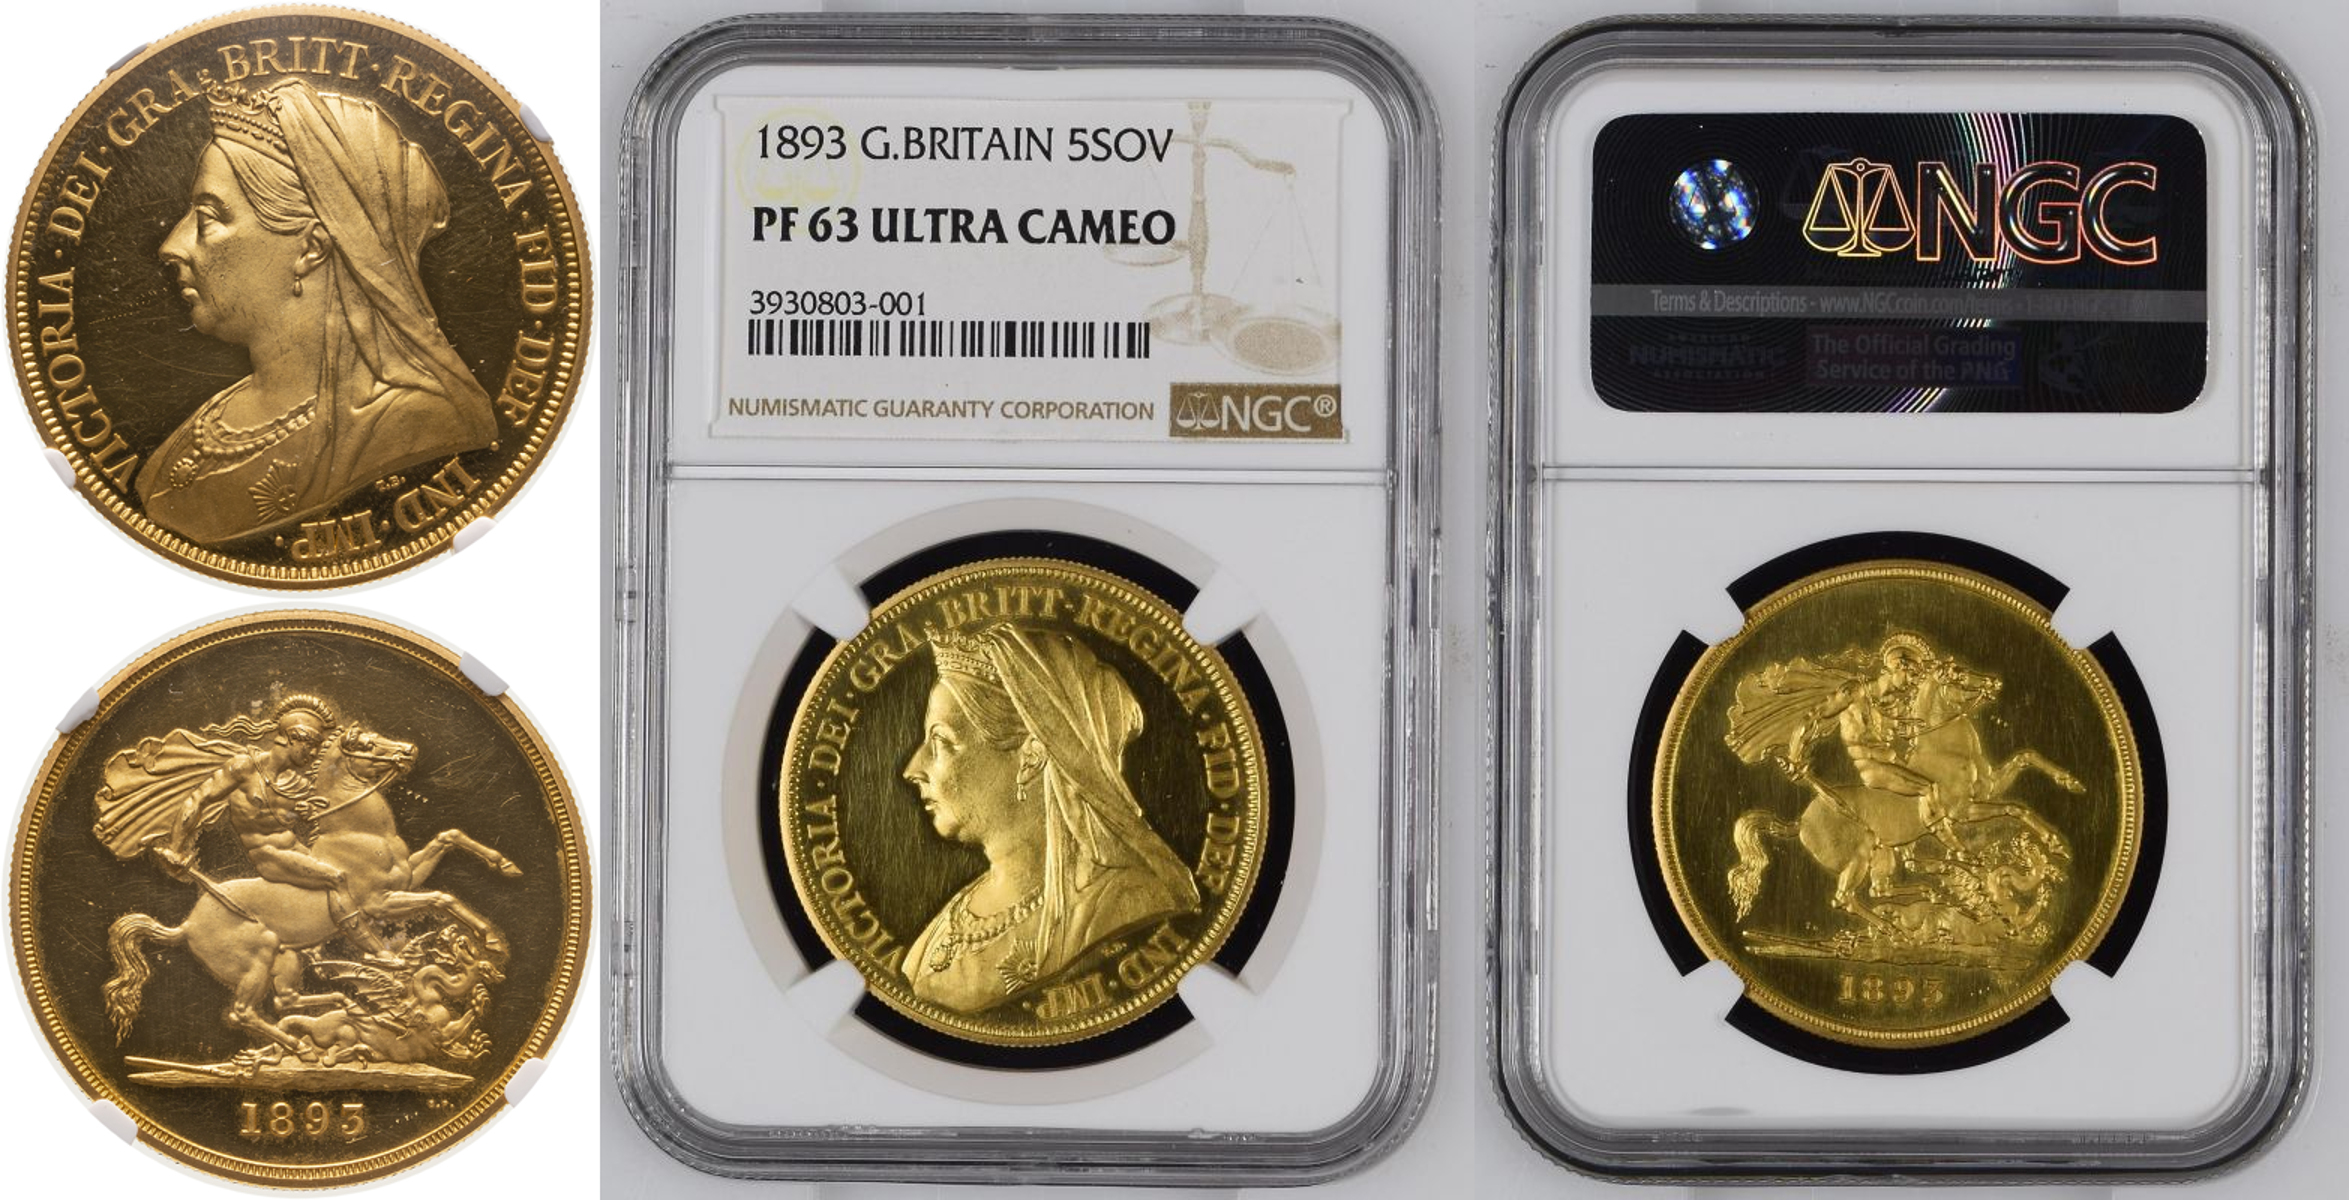 Lot 17: 1893 Gold 5 Pounds (5 Sovereigns) Proof NGC PF 63 ULTRA CAMEO #3930803-001 (AGW=1.1777 oz.)